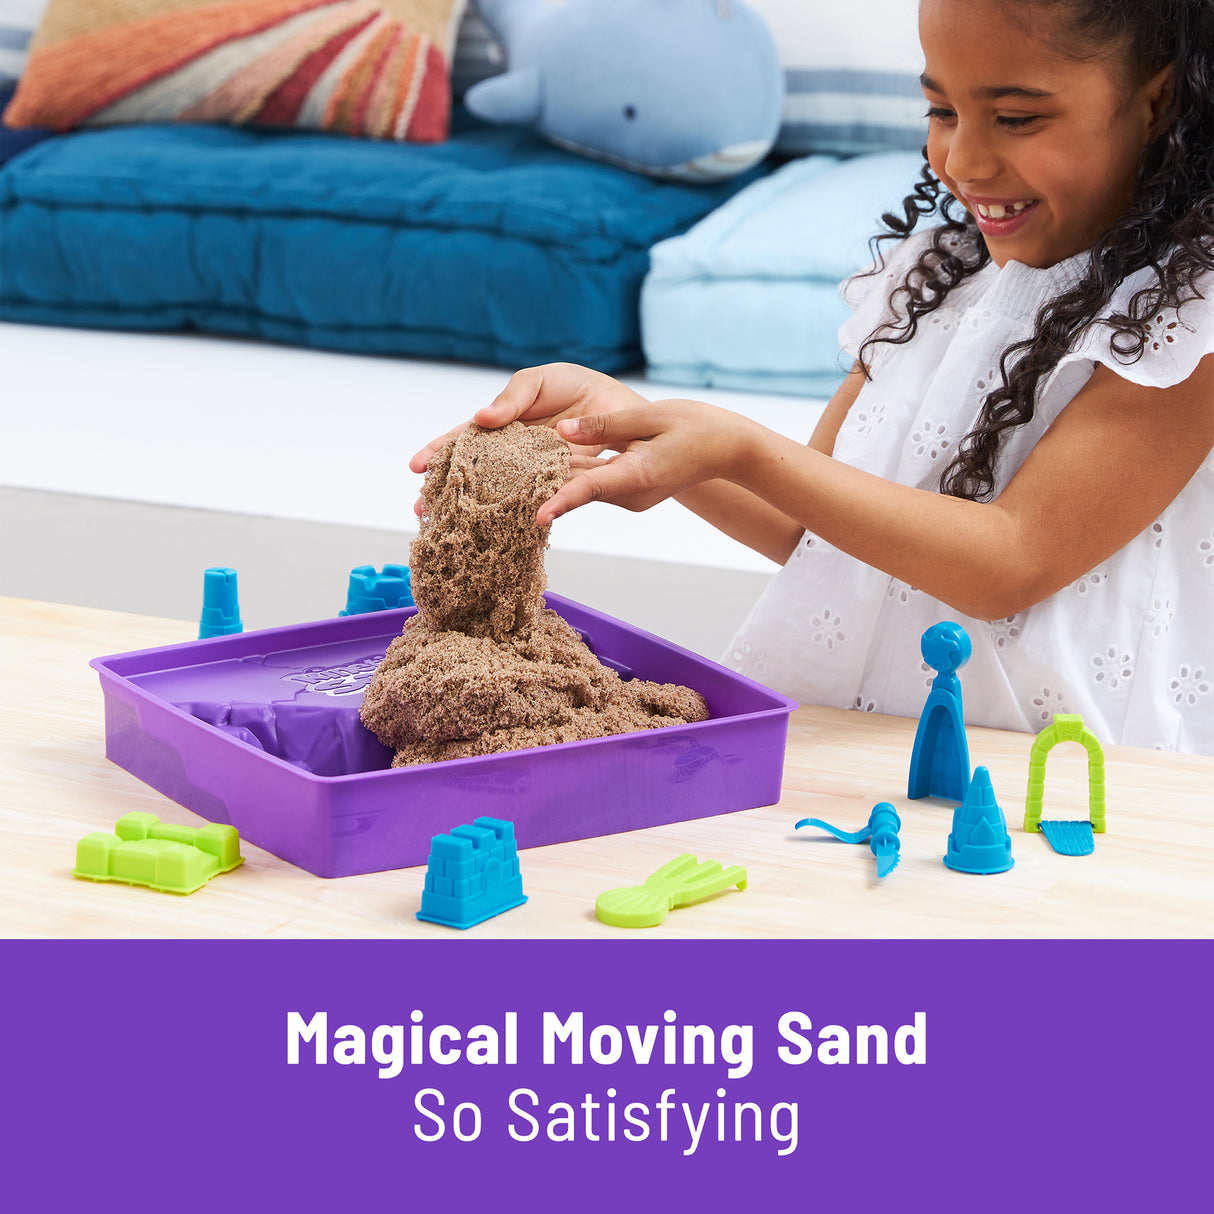 Kinetic Sand Deluxe Beach Castle Playset S24